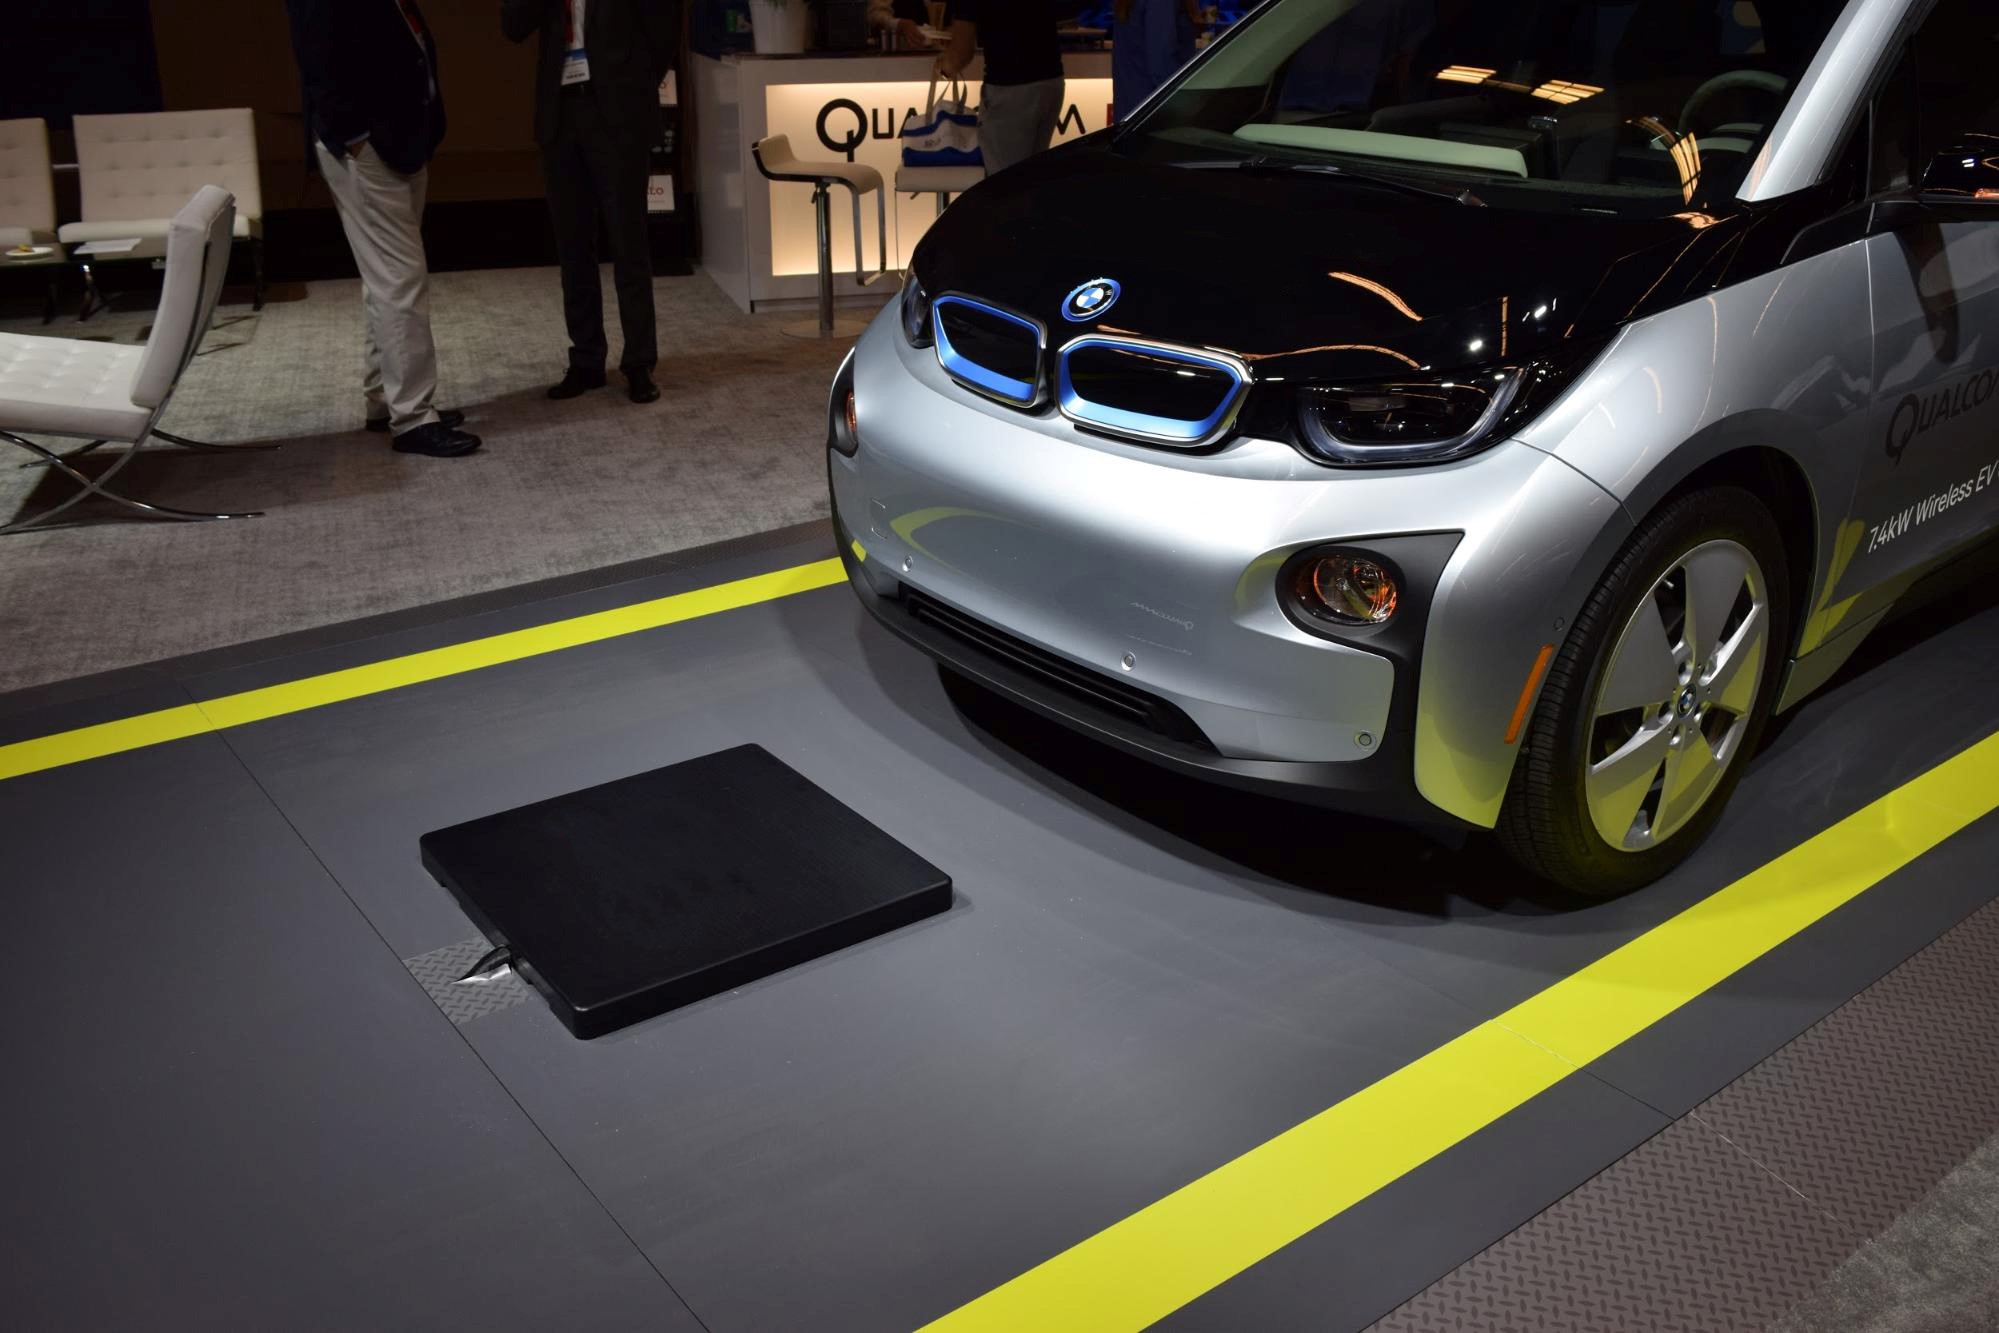 wireless_charging_stations_for_electrical_vehicles_seetech4